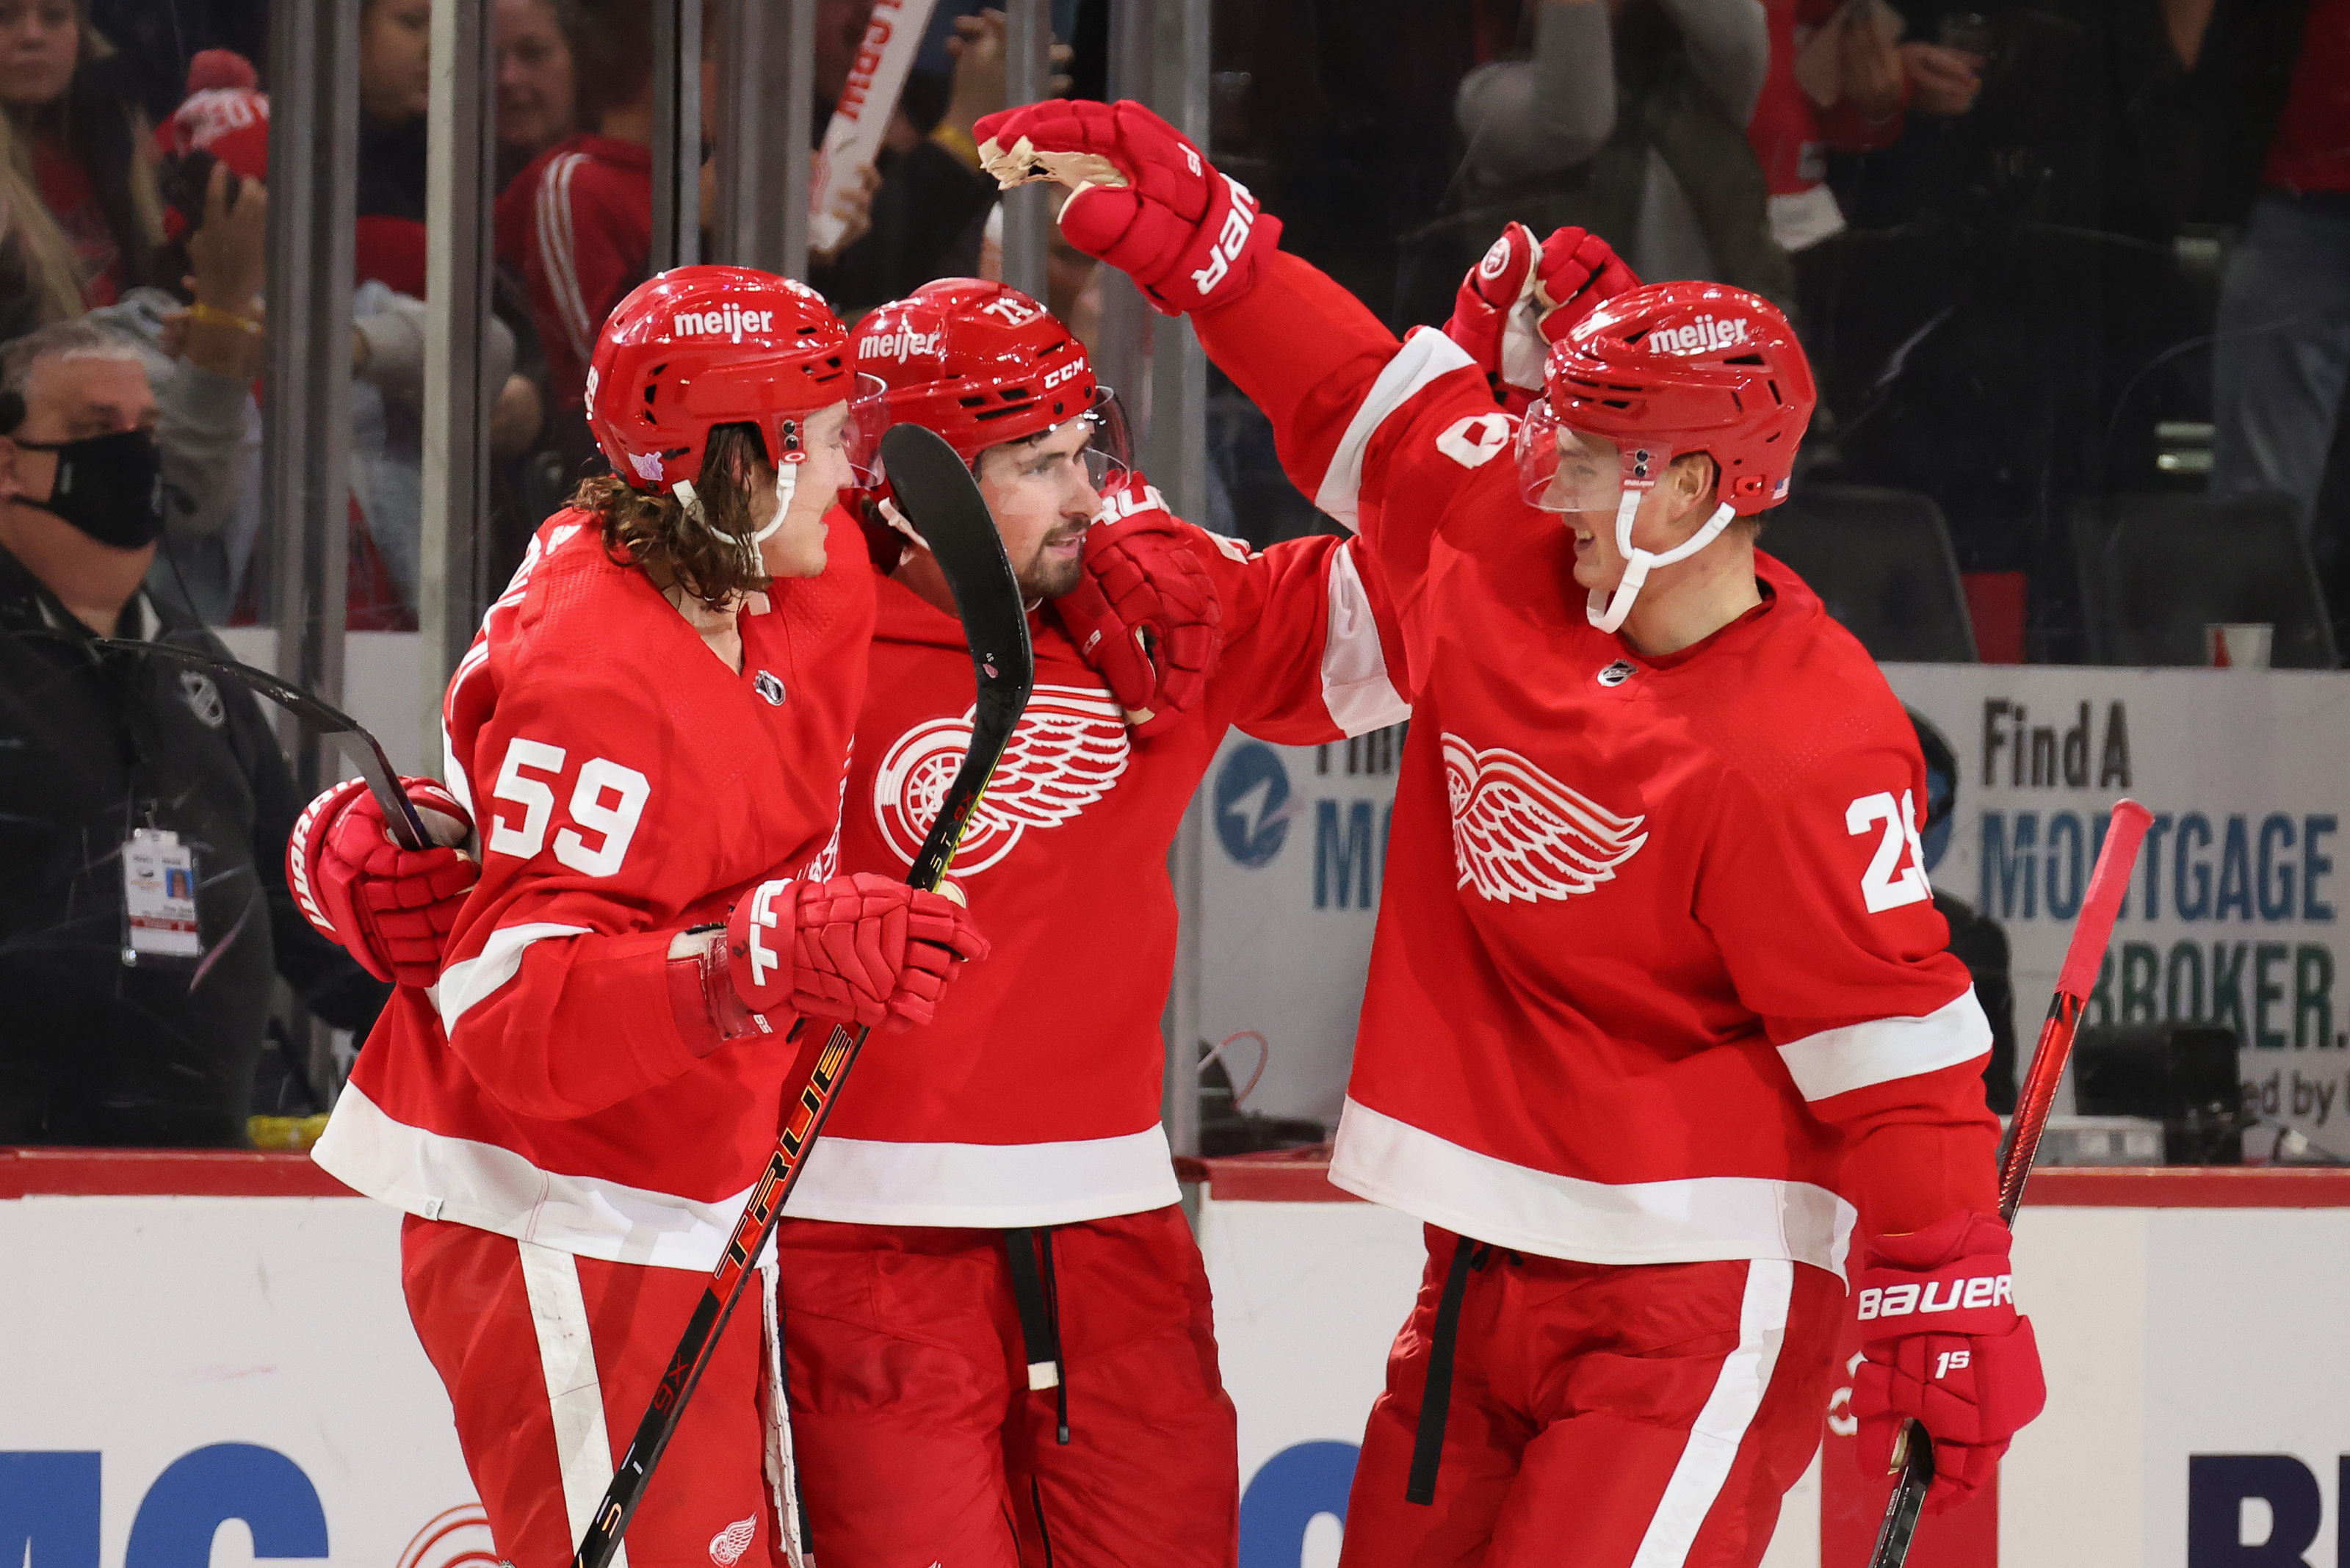 8 observations from the Red Wings 5-2 win over New Jersey